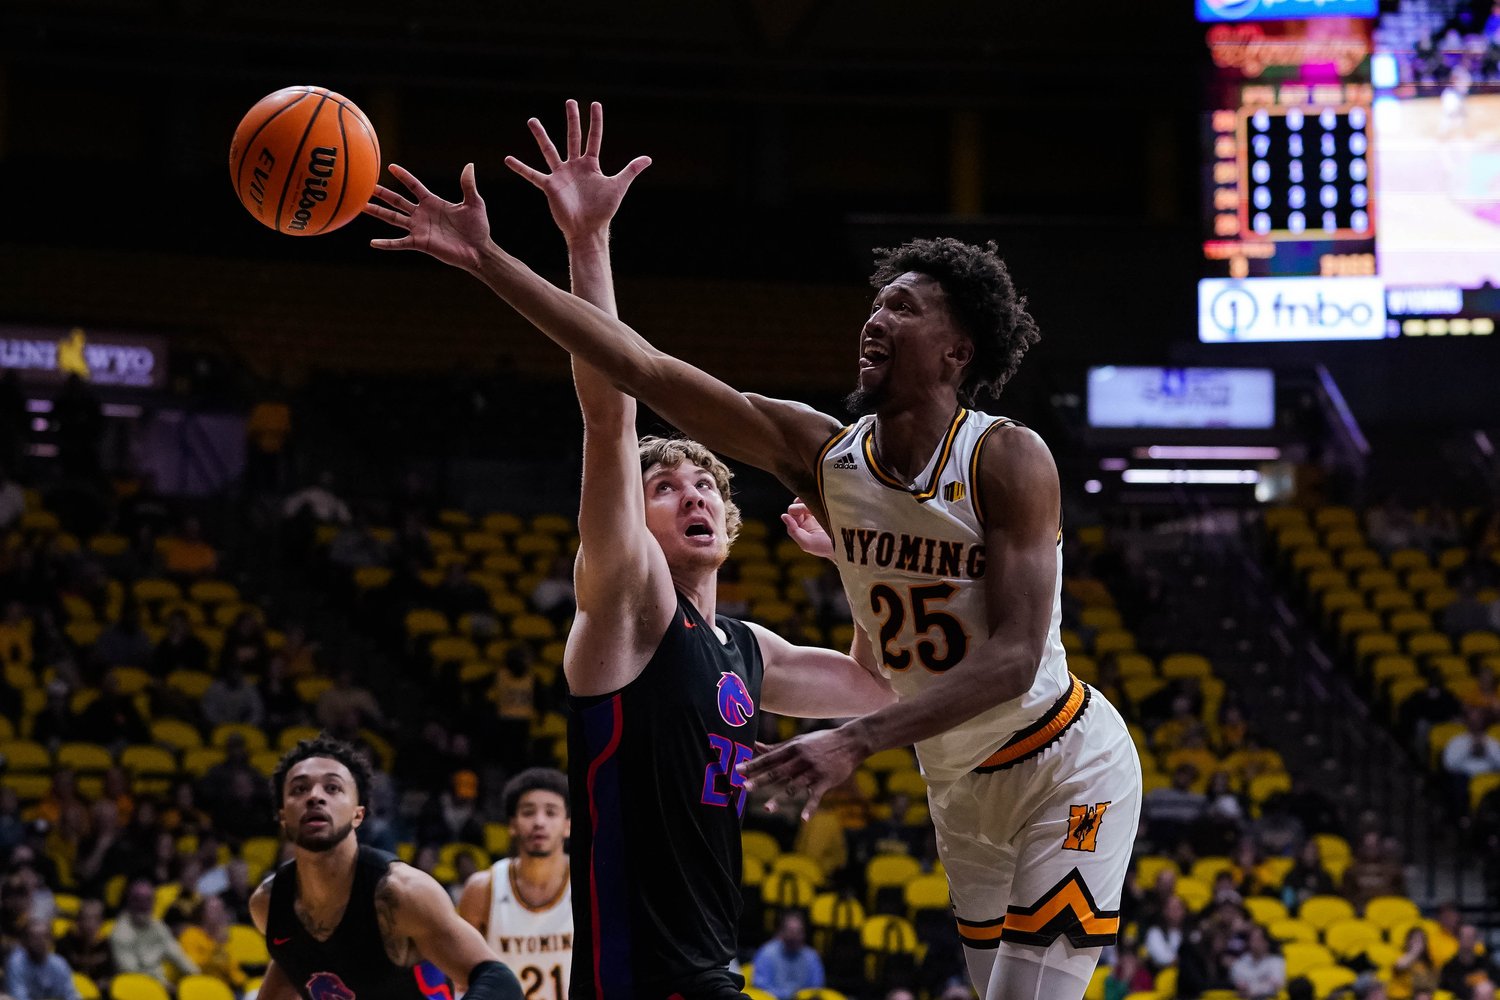 WYOMING BASKETBALL: Cowboys Drop Seventh Straight Game, Lose to Boise State